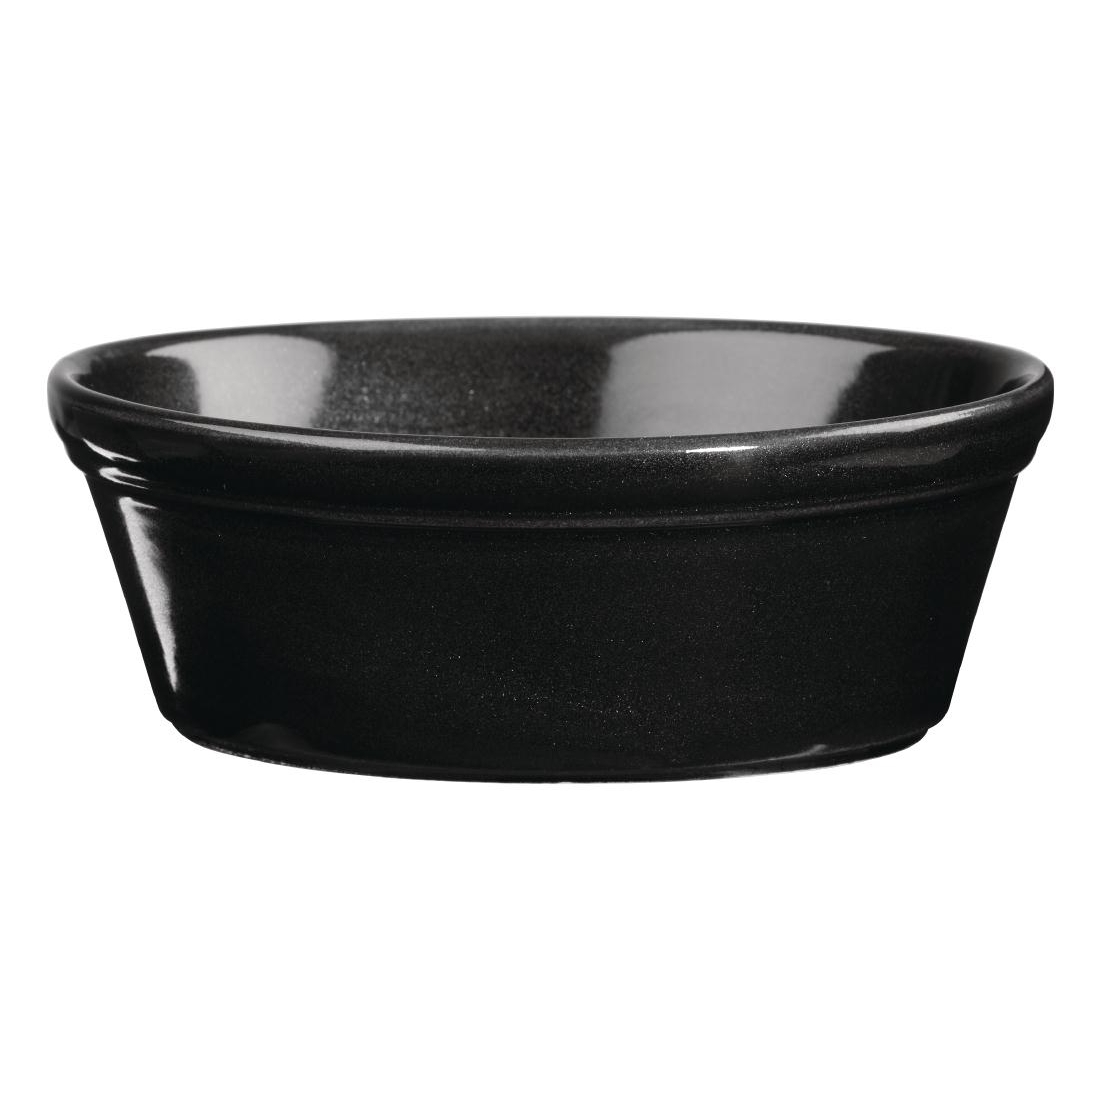 Churchill Cookware Oval Pie Dishes 150mm